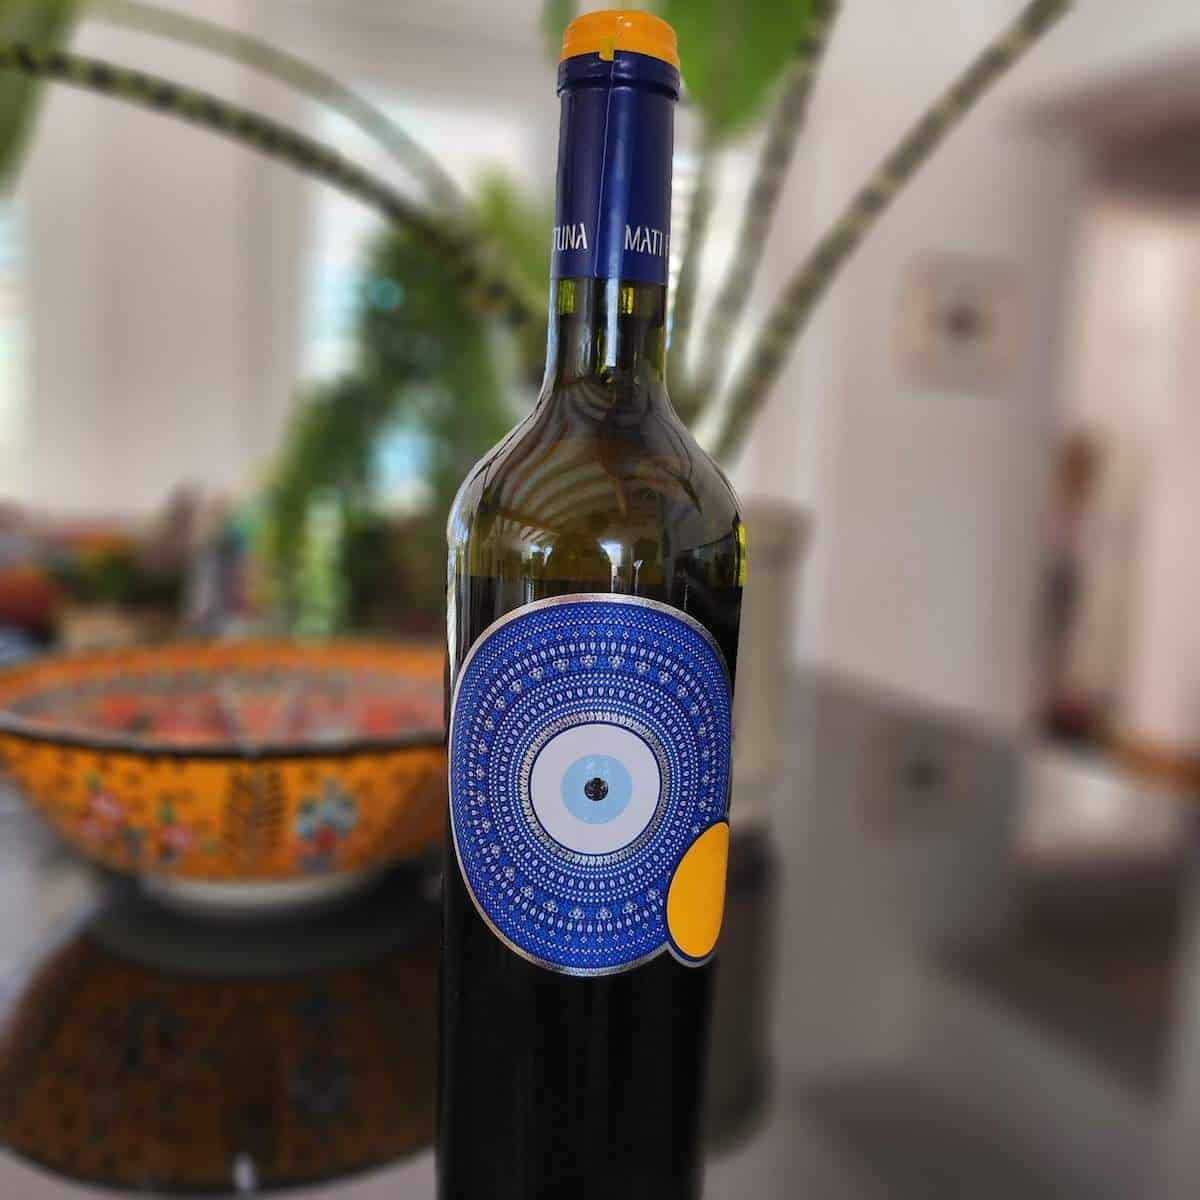 A bottle of wine with an evil eye embellishment from Greece.